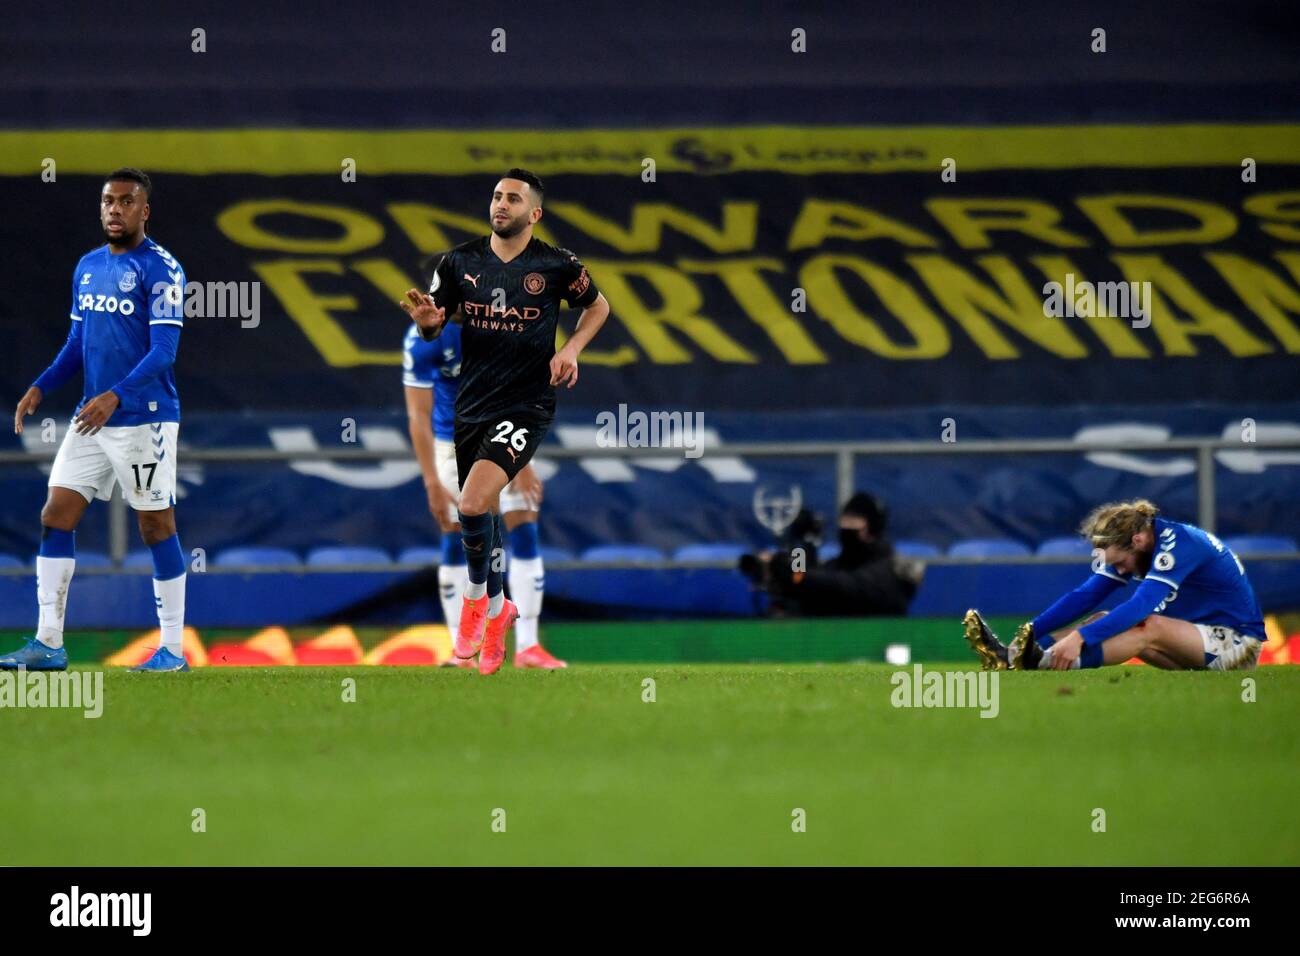 Liverpool, United Kingdom, 17th February 2021. Pictured left to right, Everton’s Alex Iwobi looks-on as Manchester City's Riyad Mahrez celebrates scoring his side's third goal of the game as Everton’s Tom Davies reacts. Credit: Anthony Devlin/Alamy Live News Stock Photo